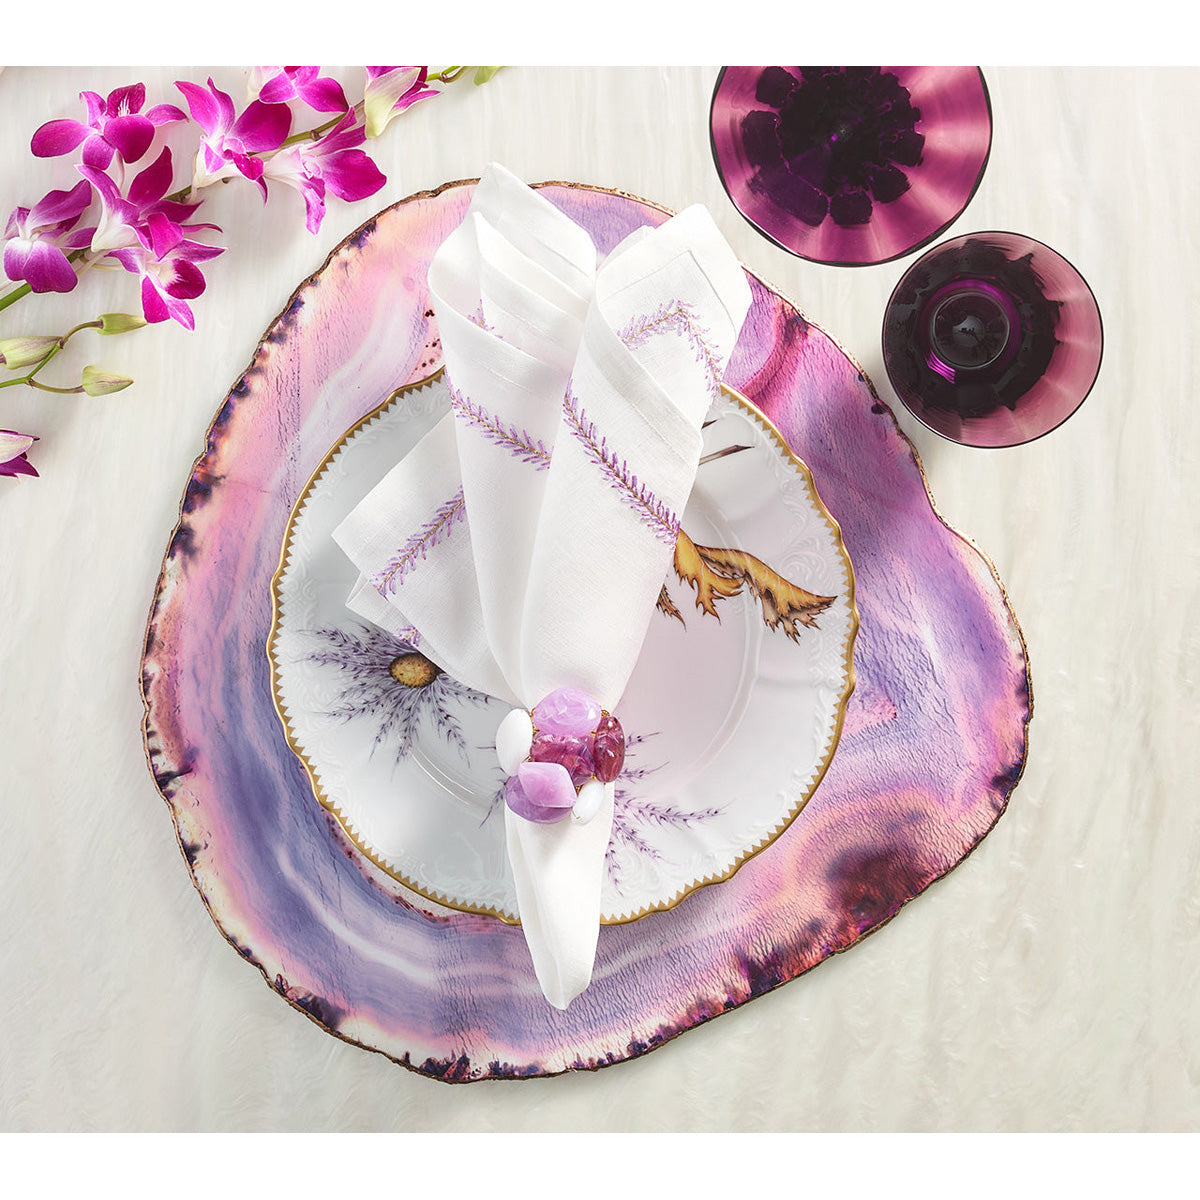 Amethyst Placemat in Amethyst - Set of 4 by Kim Seybert Additional Image-2